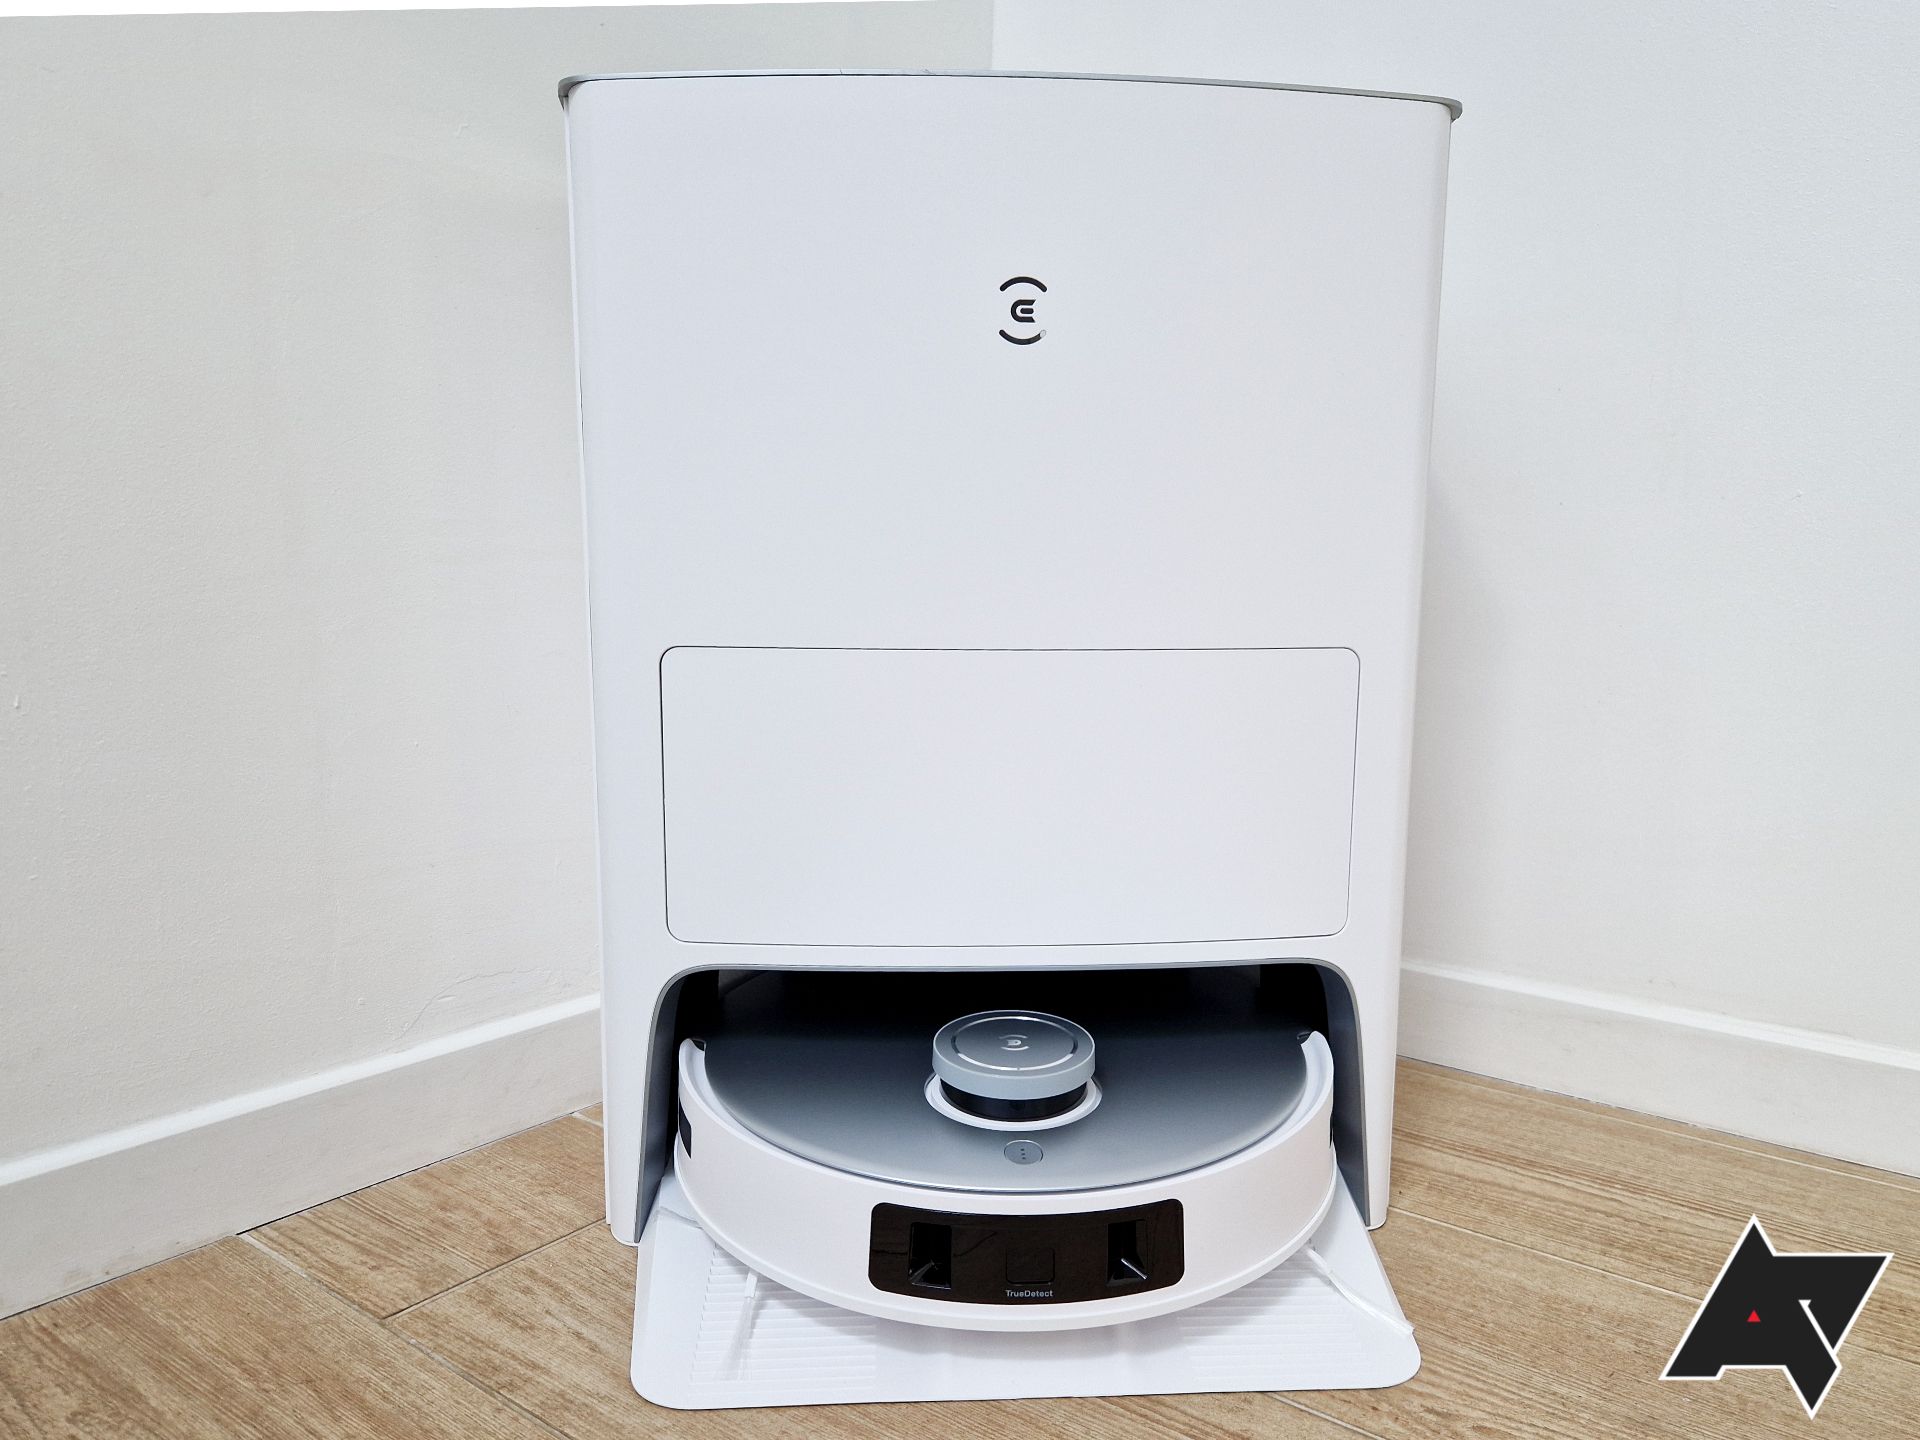 ECOVACS Deebot T20 Omni Review and Demo 